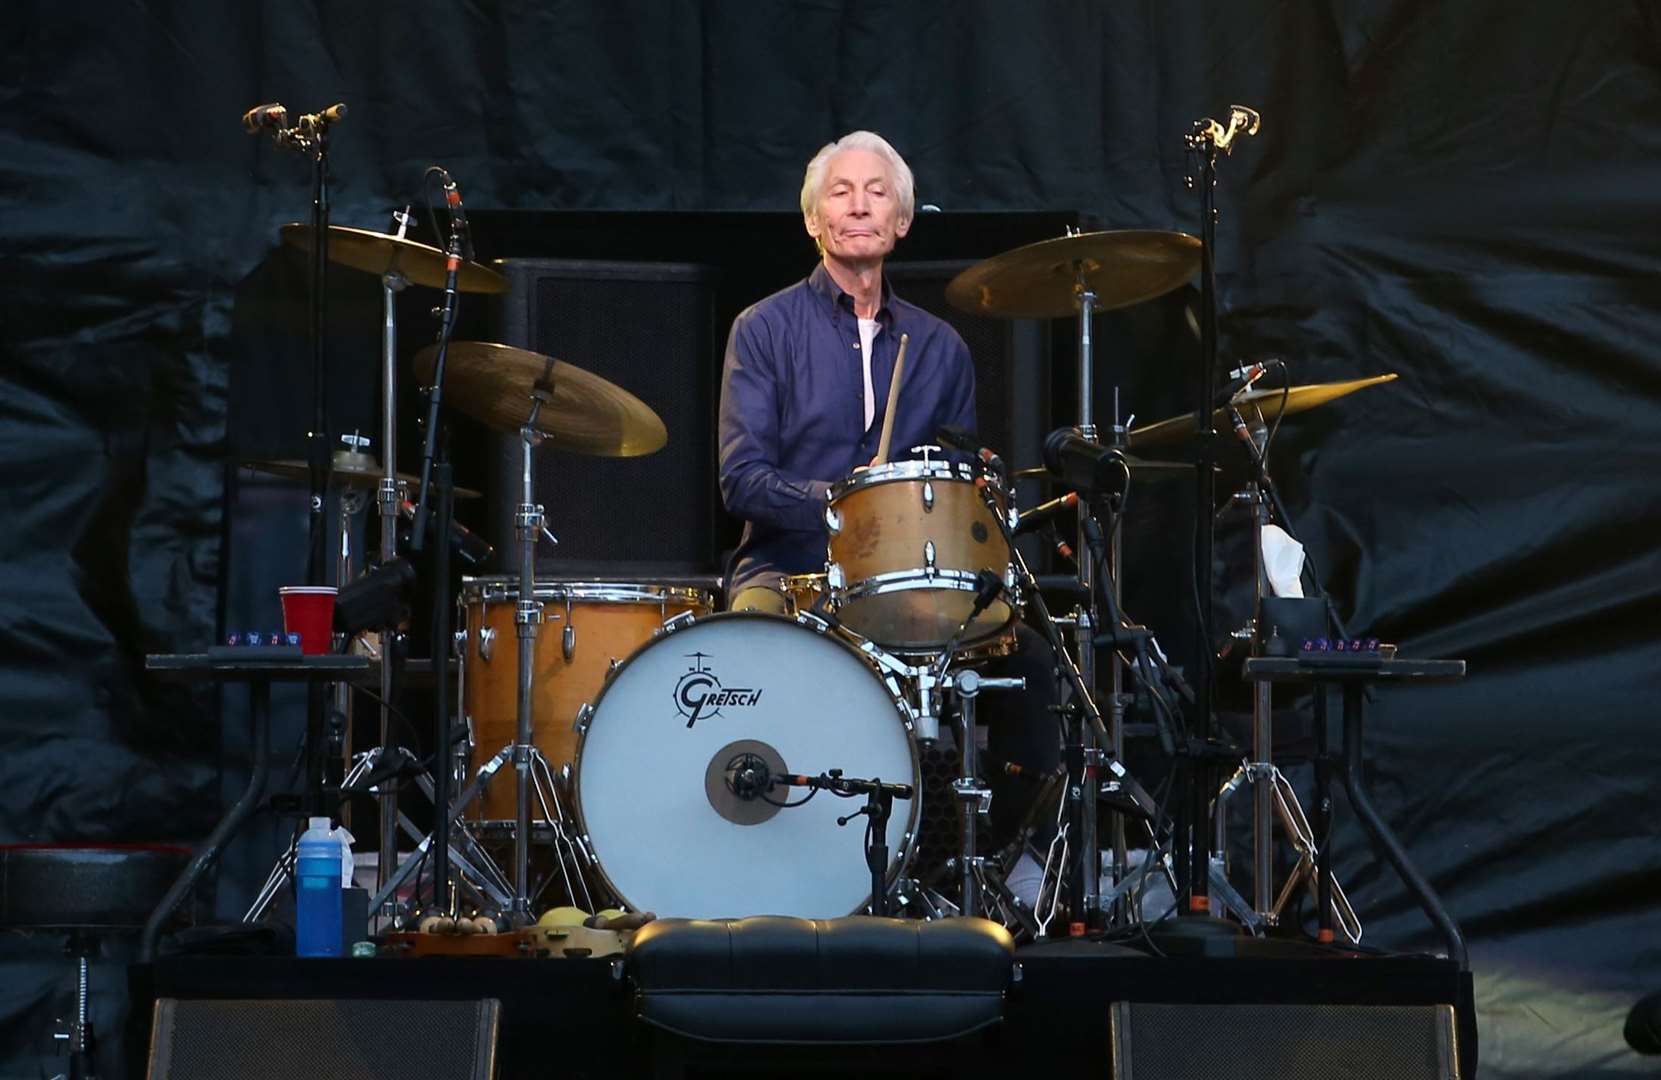 Charlie Watts during a gig in 2018 (Jane Barlow/PA)